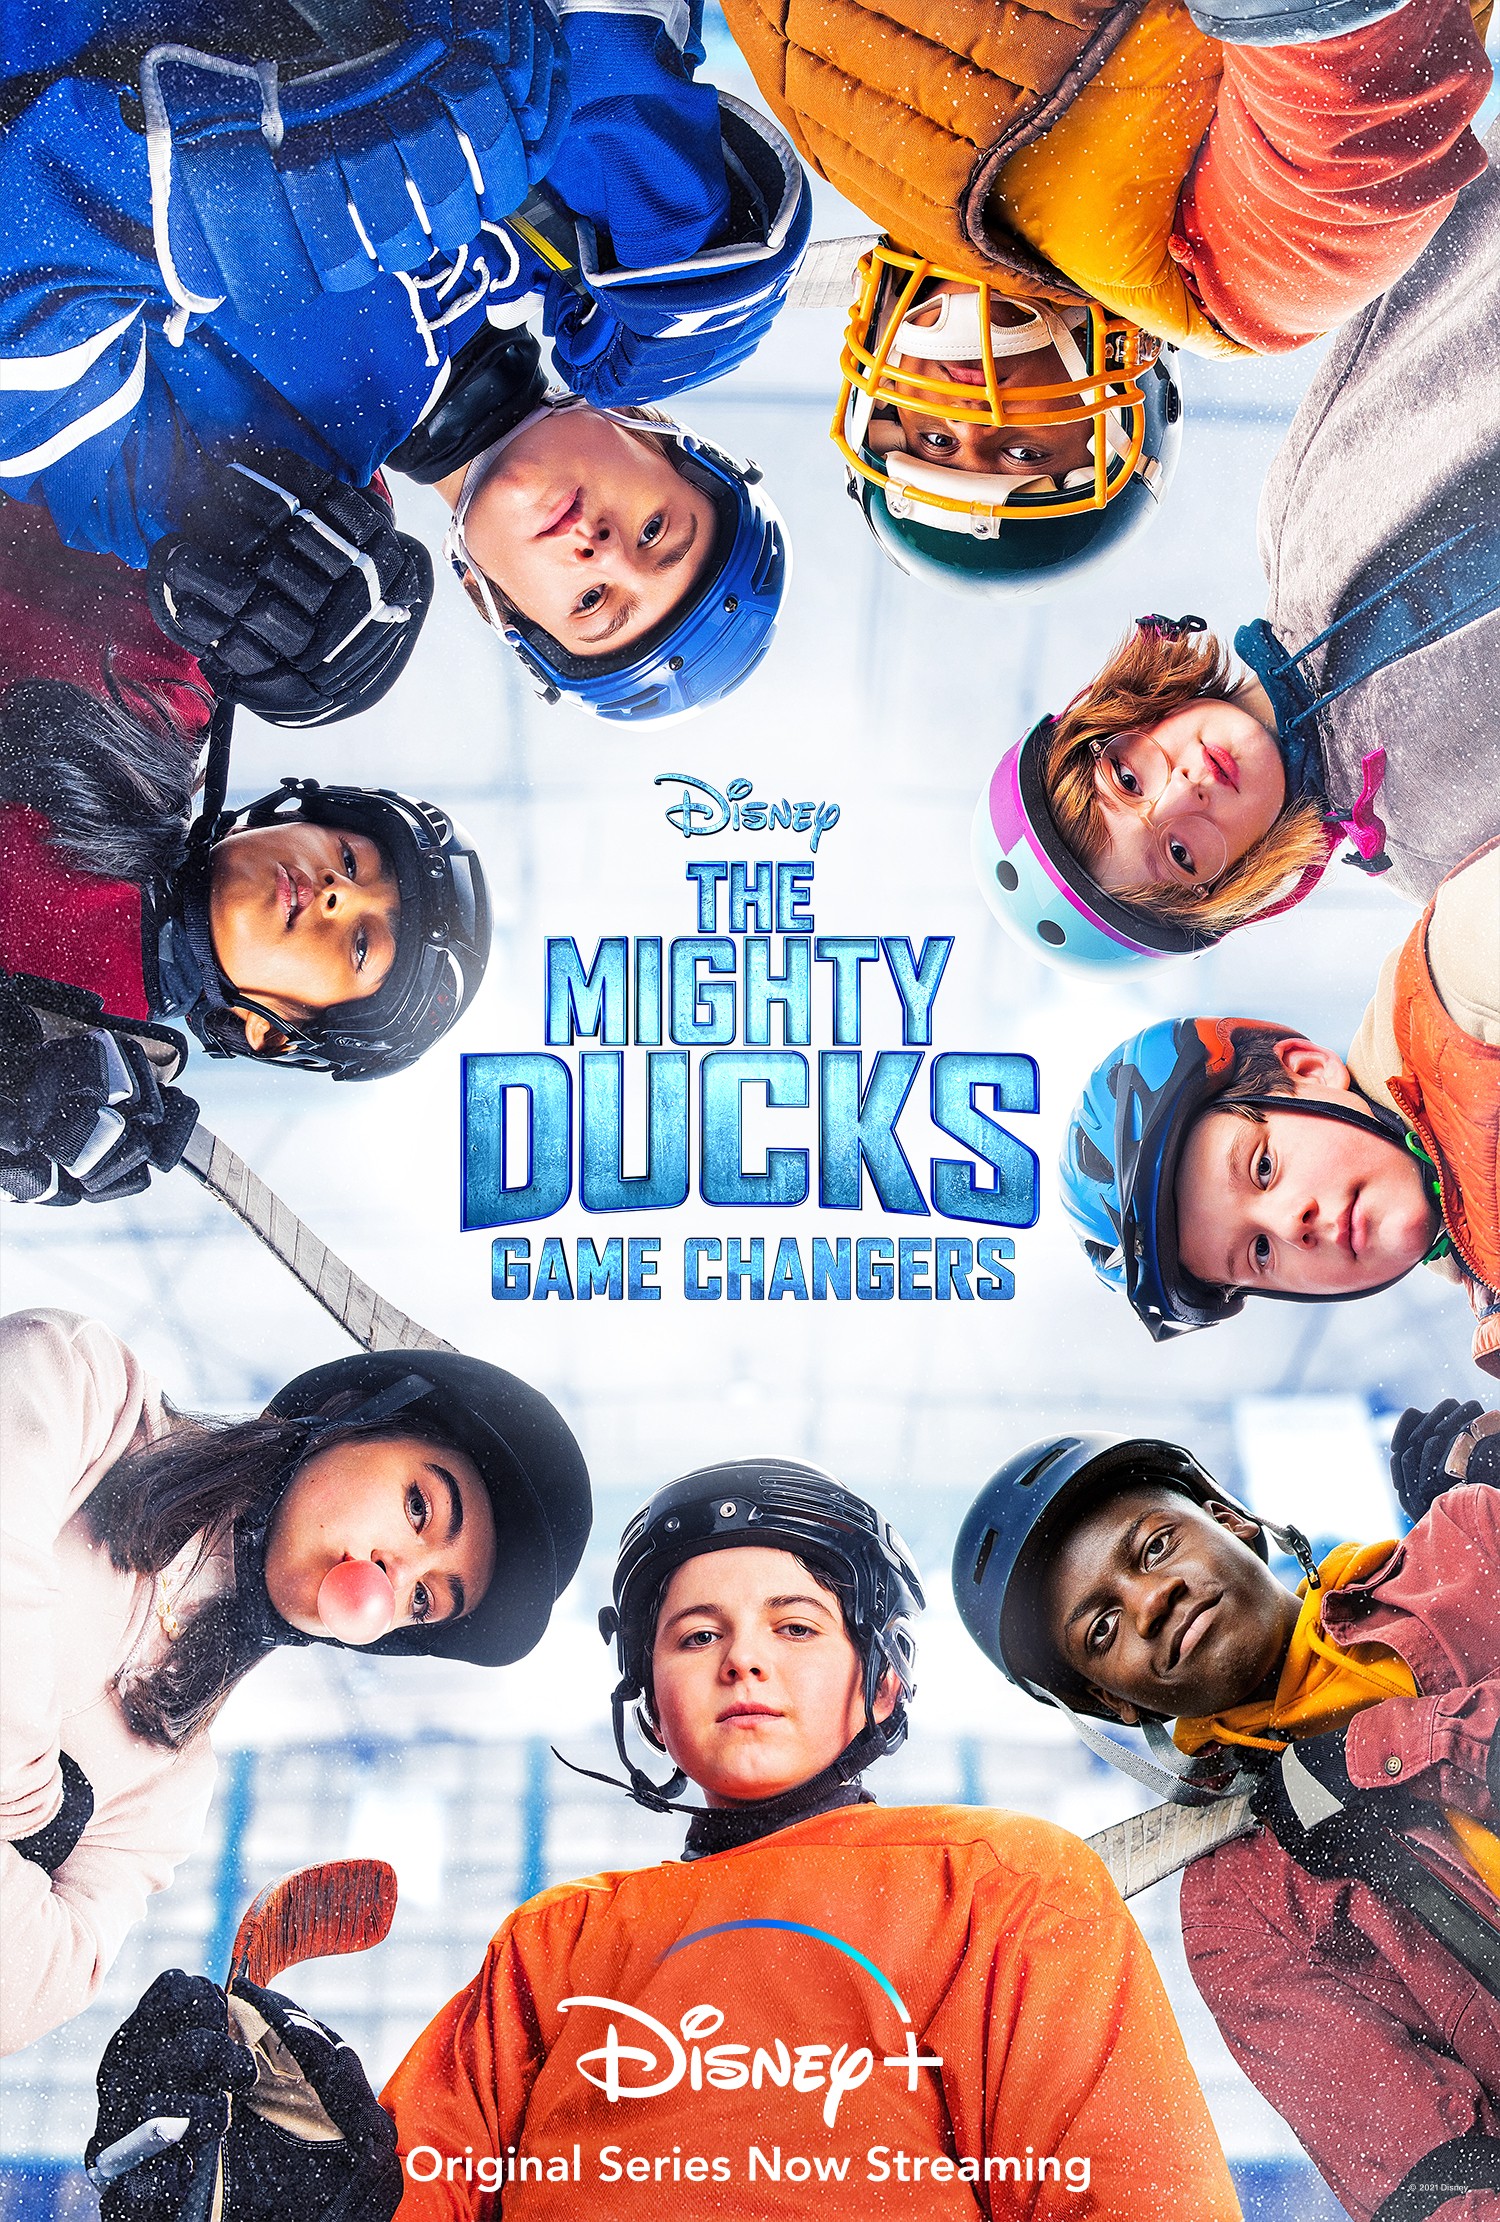 Review: The Mighty Ducks Game Changers, Season 1, Episode 3 - Puck Junk